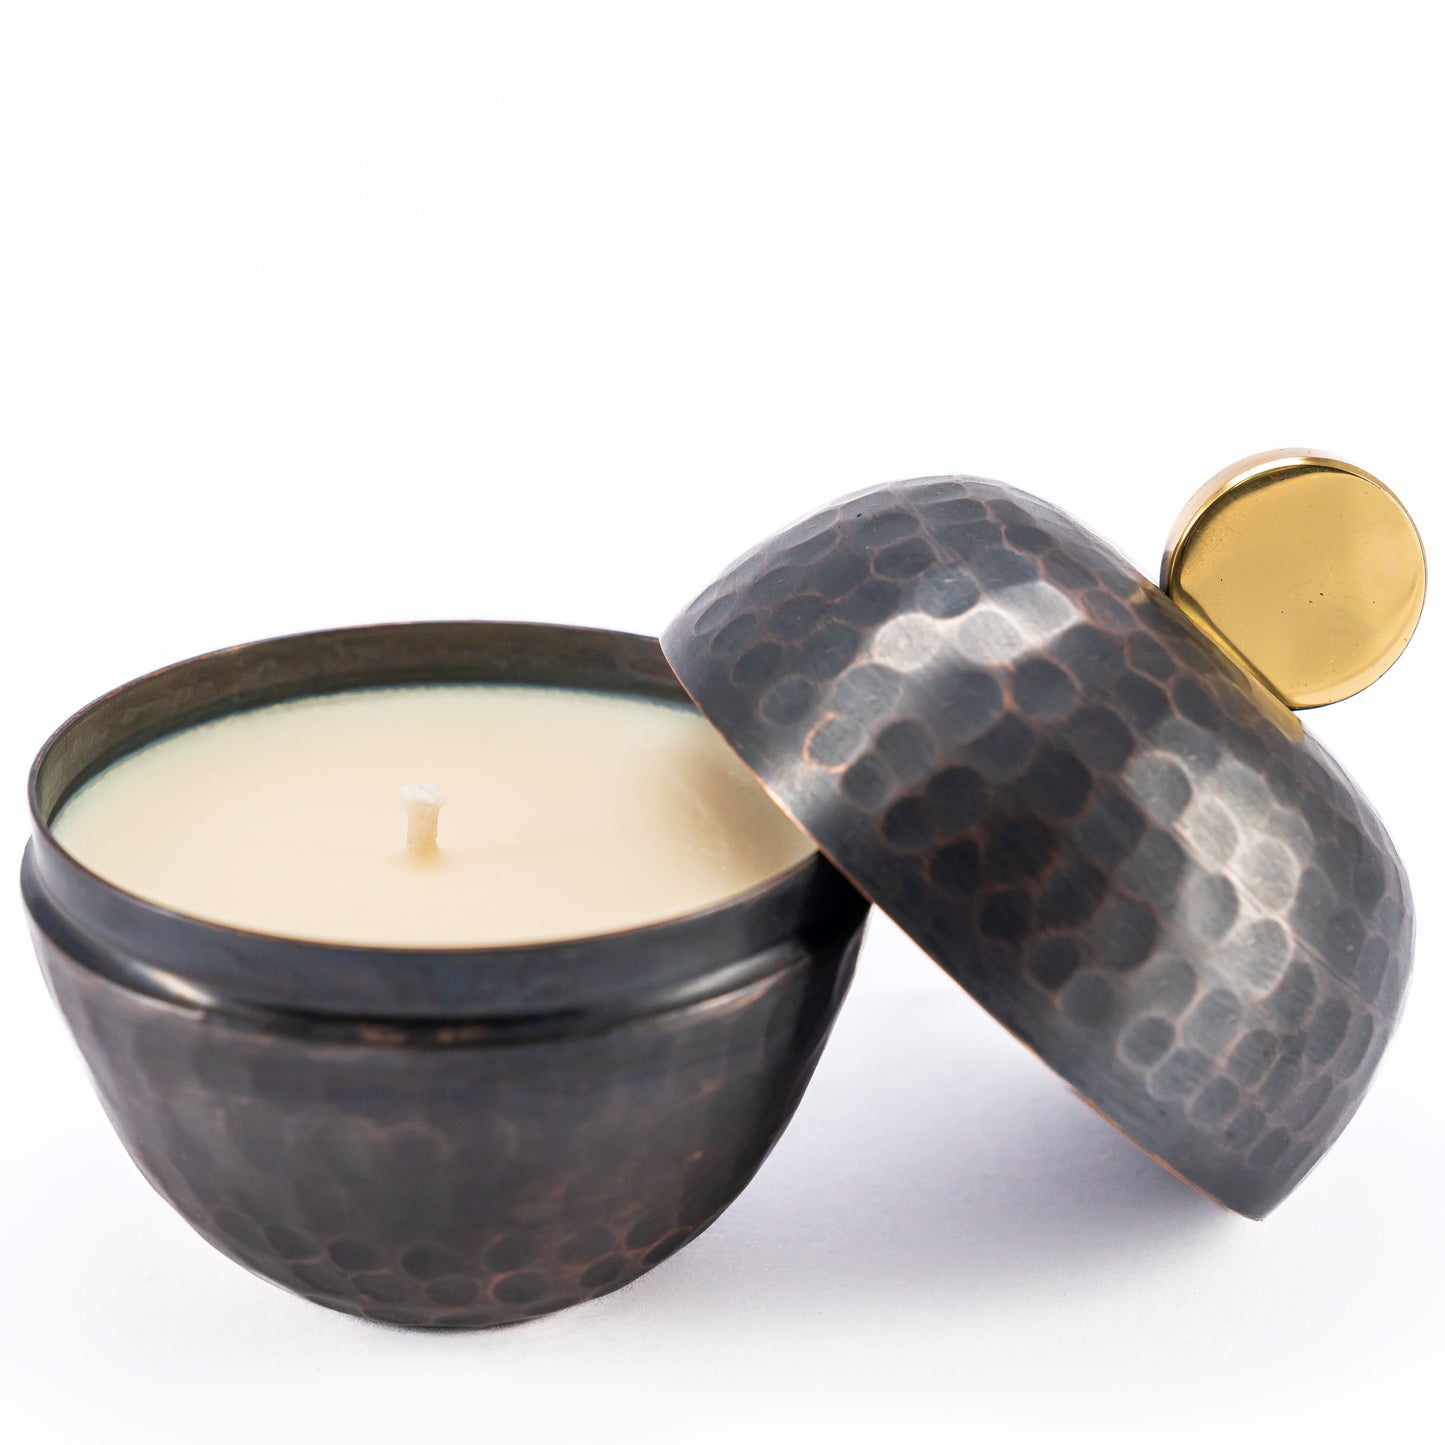 ALMUS hand poured scented candle in handmade copper container